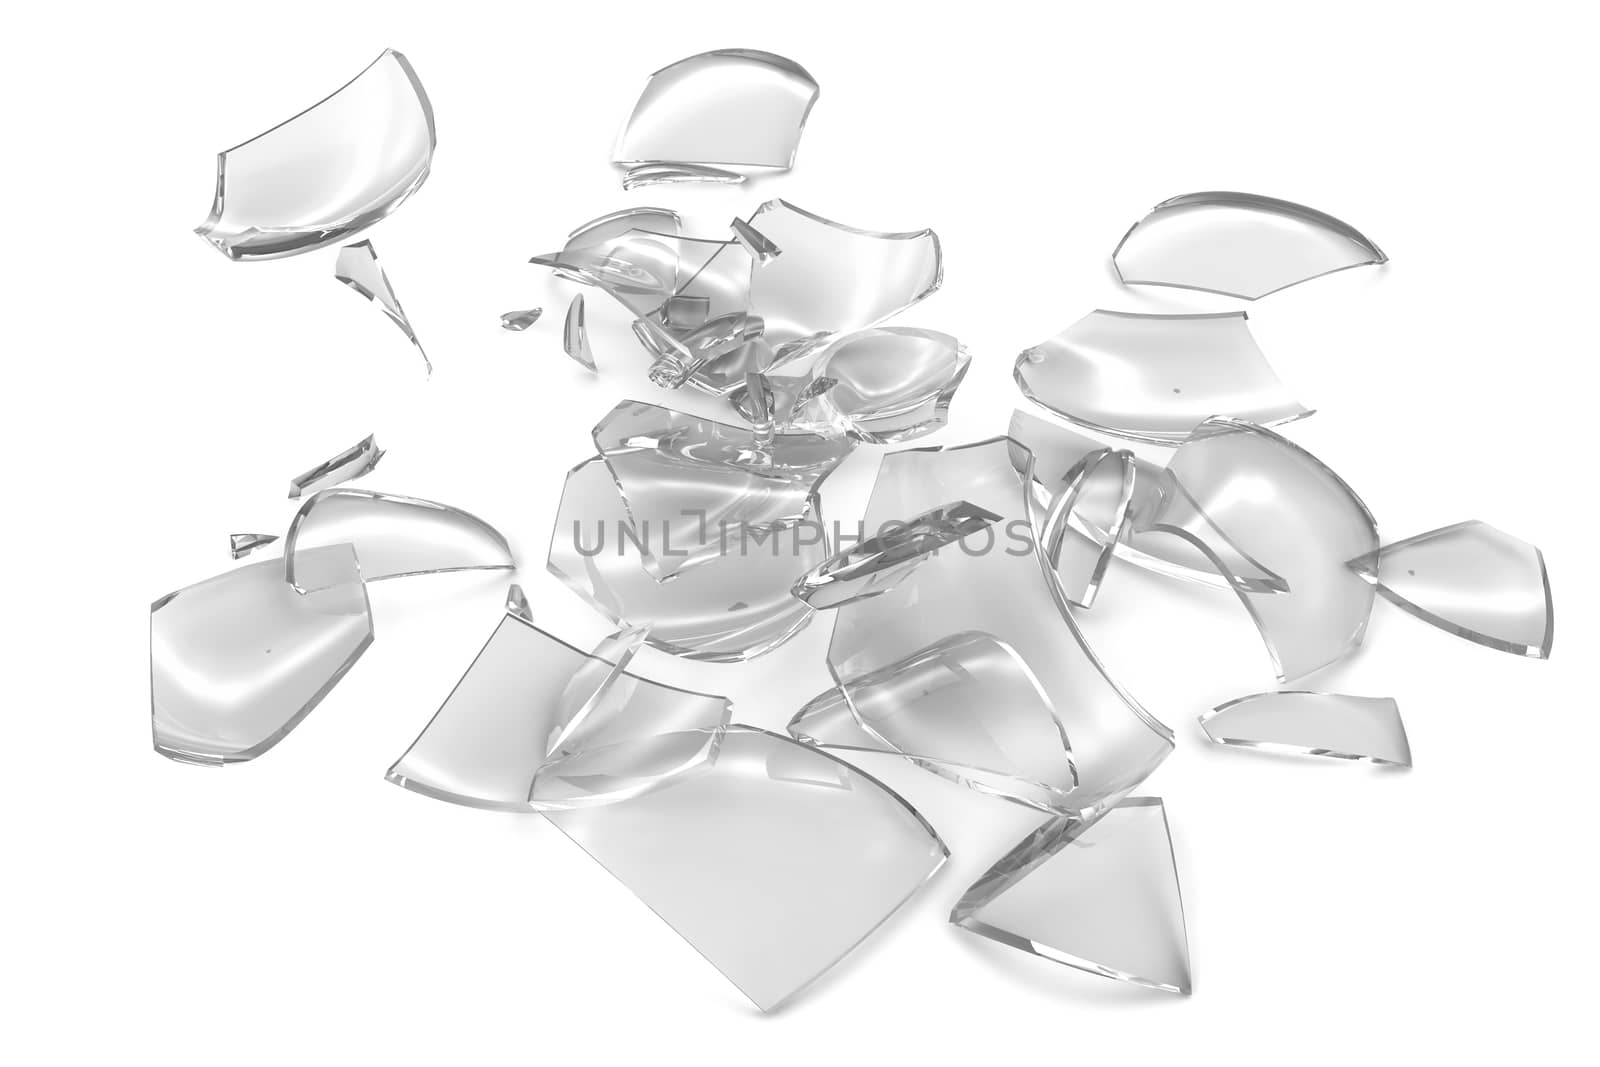 Broken glass. Isolated render on a white background